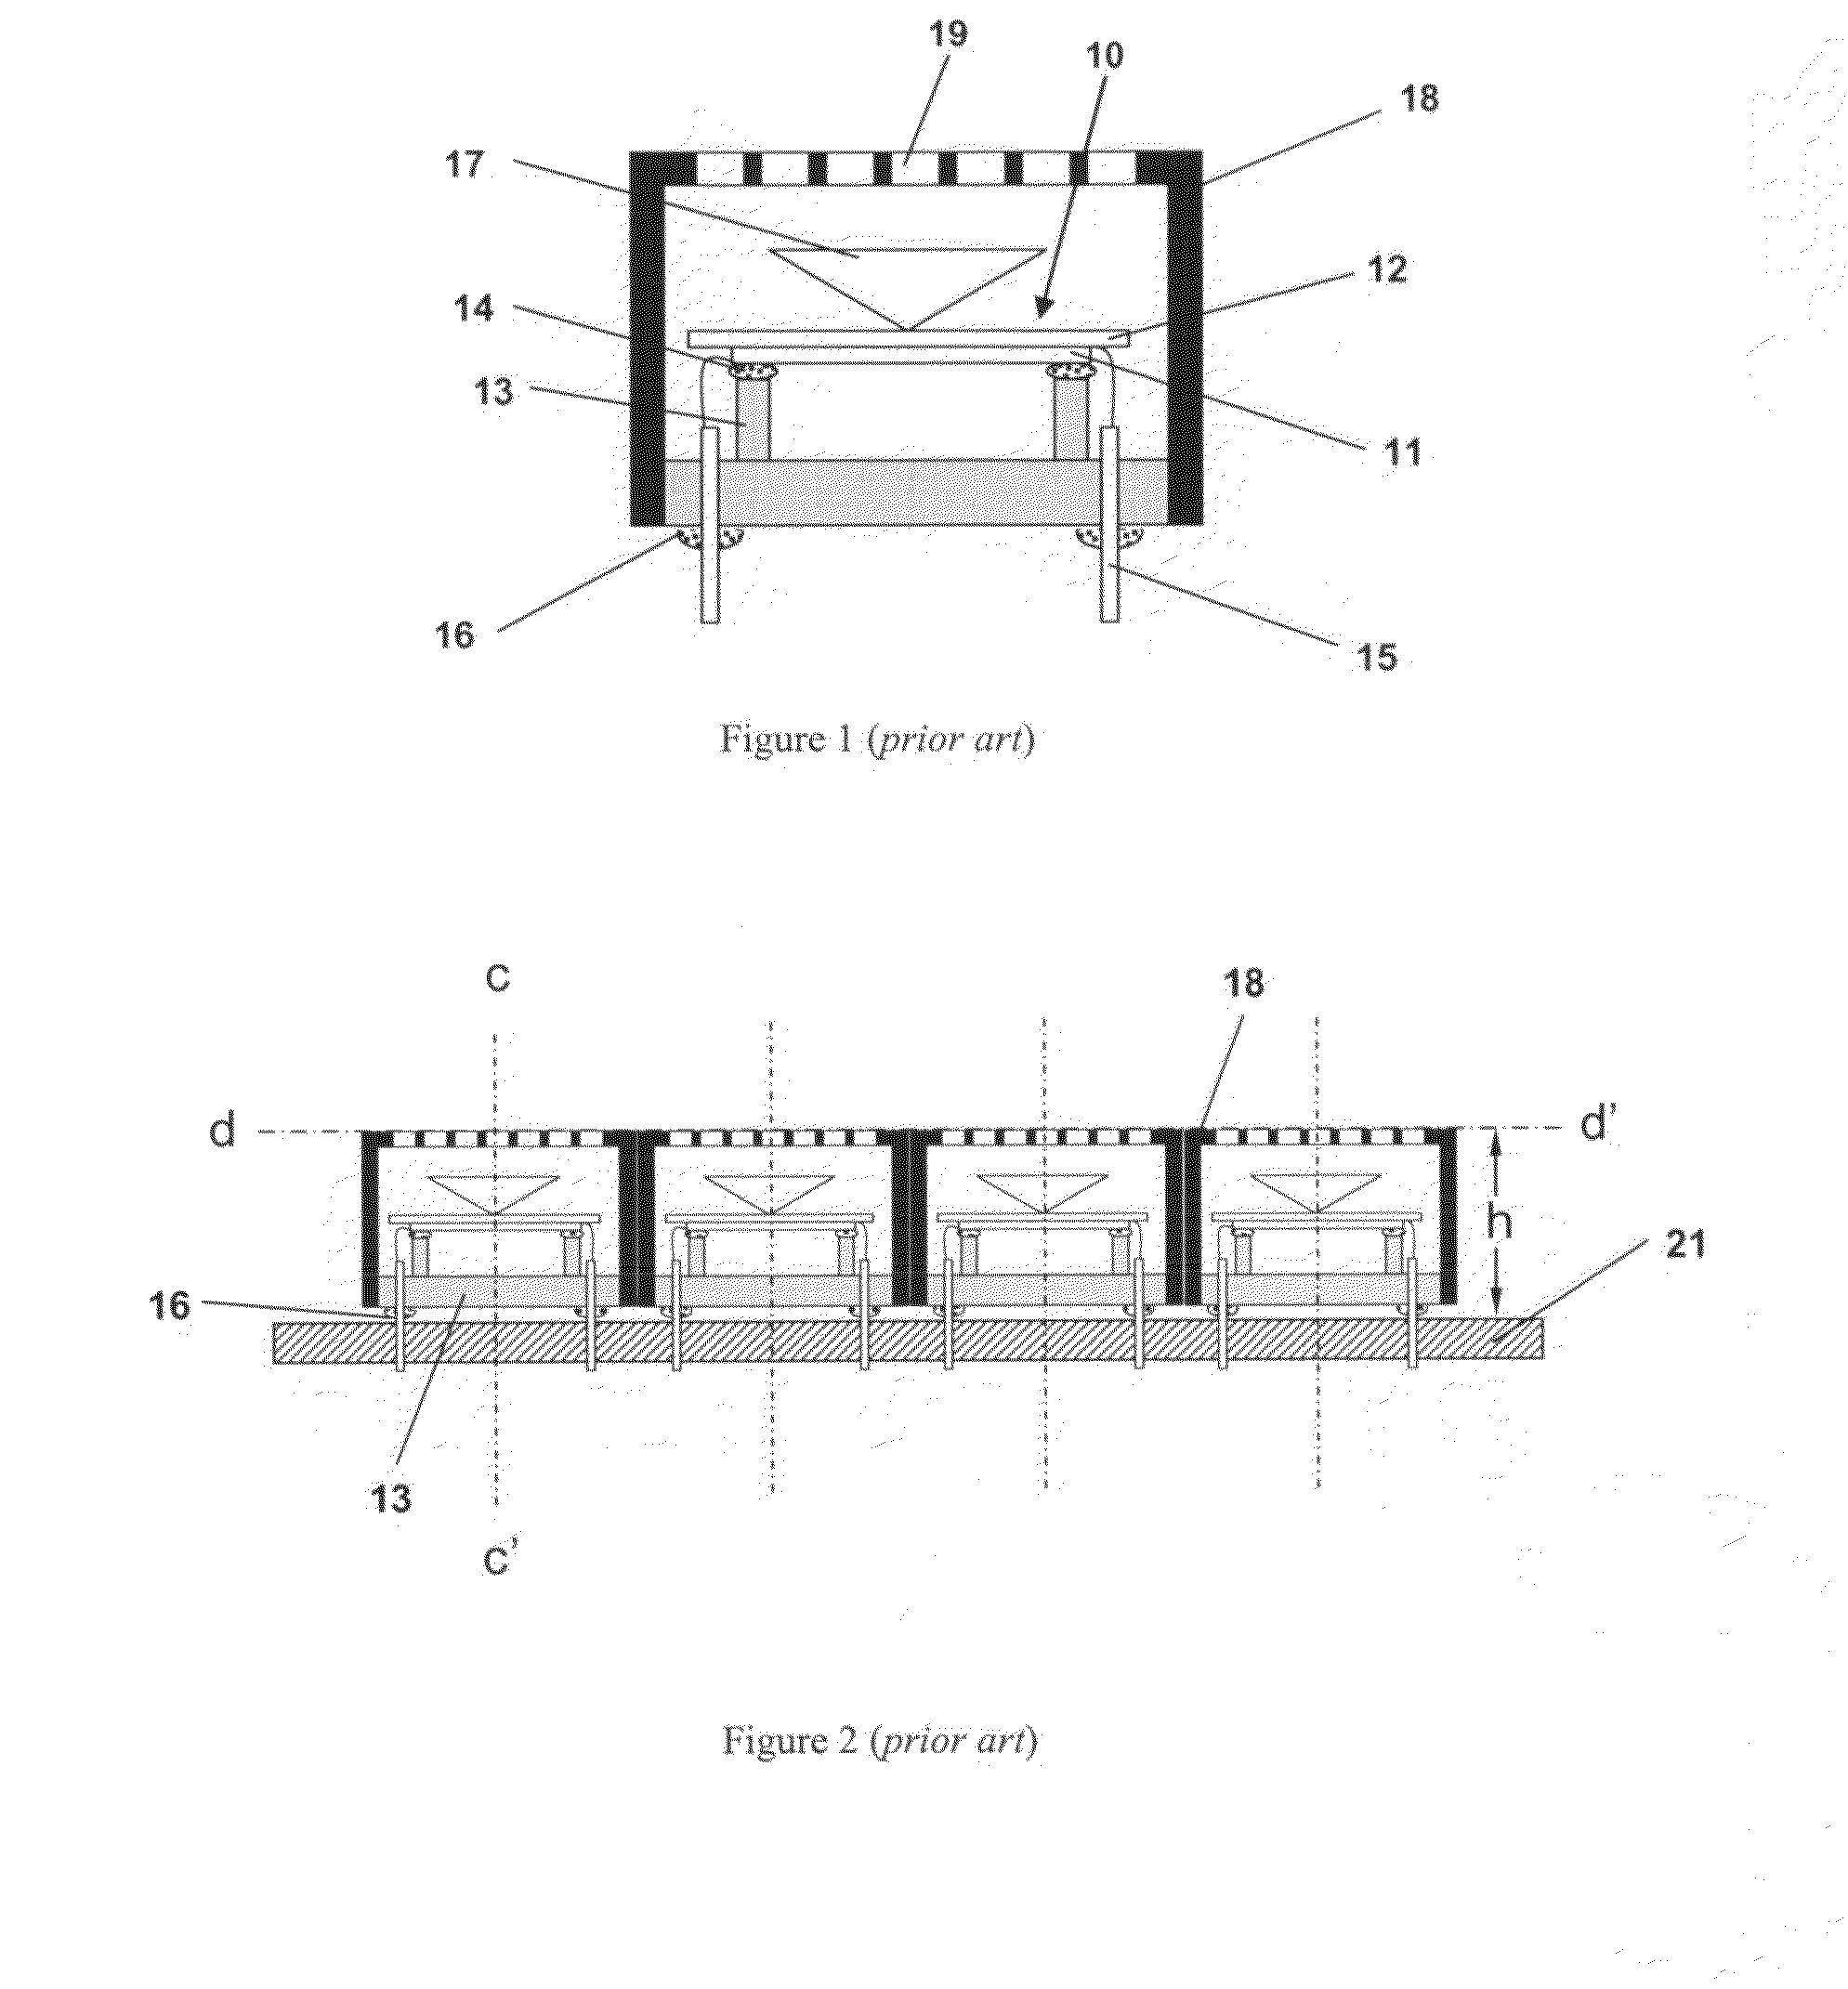 Ultrasonic transducer array and a method for making a transducer array